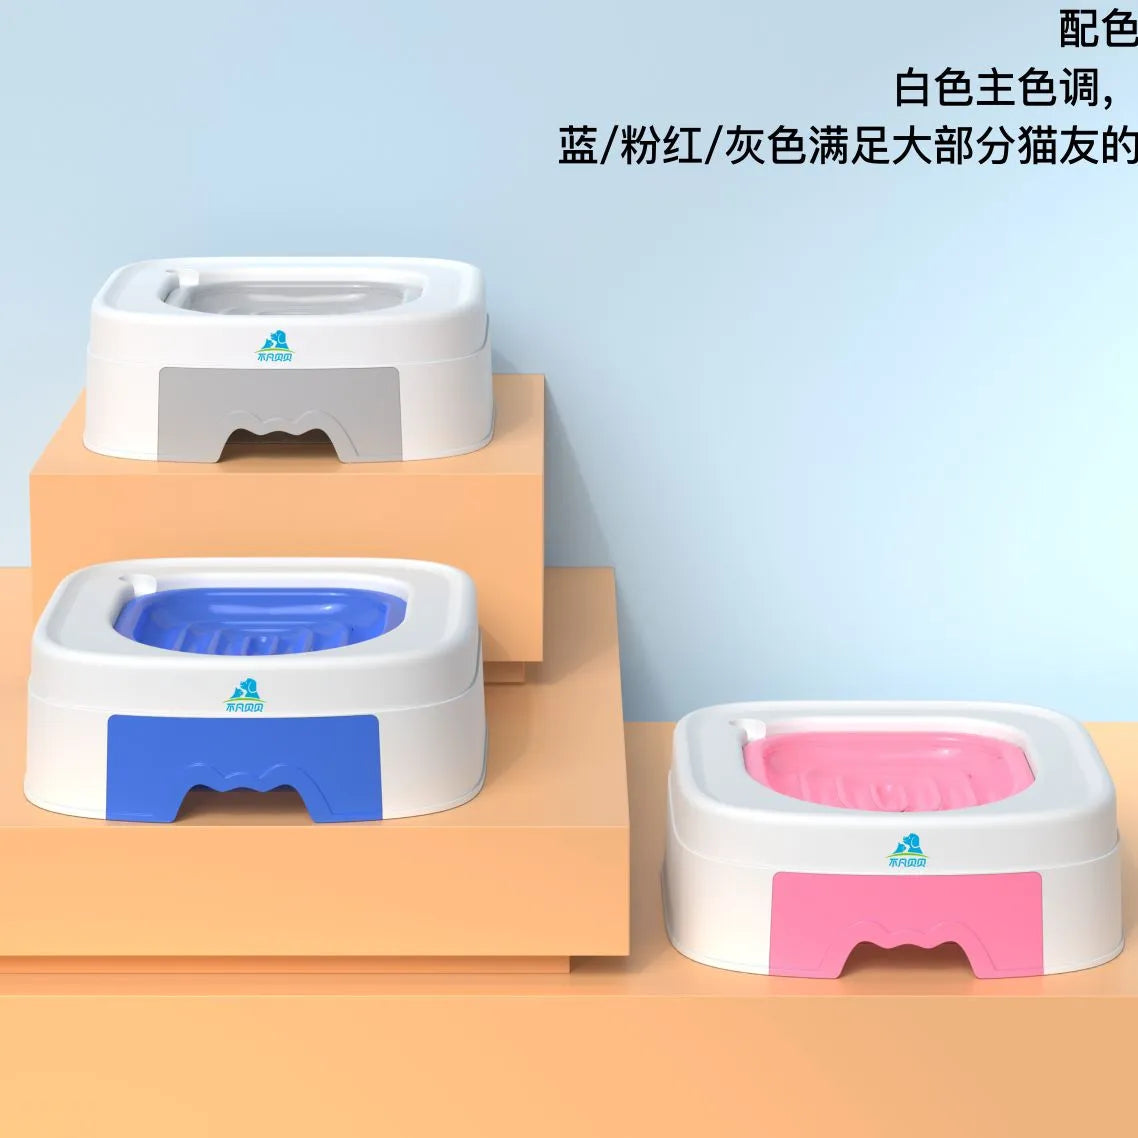 2023 Latest Cat Toilet Toilet Trainer, Reusable Cat Litter Box Without Cat Litter, Teaching Cats to Use Toilet Tools